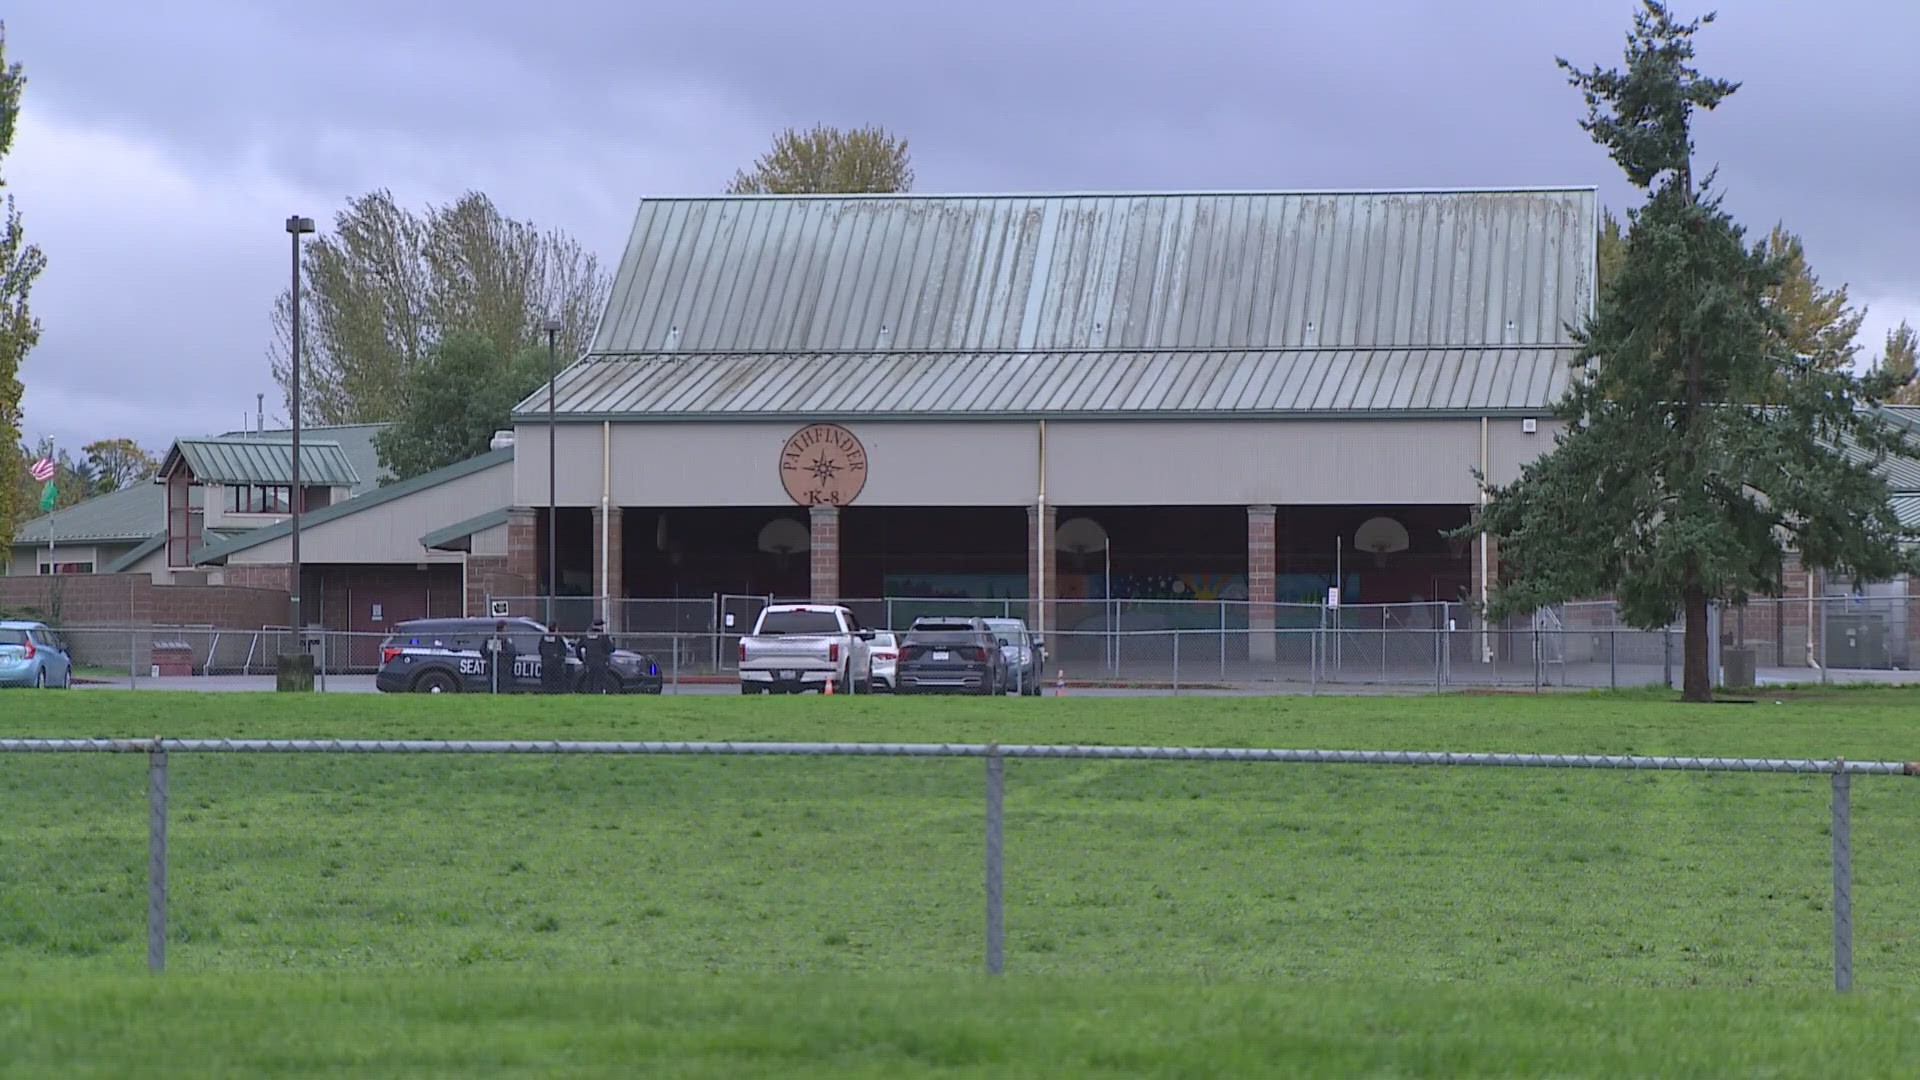 A 911 caller reported to Seattle police that a man with a weapon entered Pathfinder K-8 school.